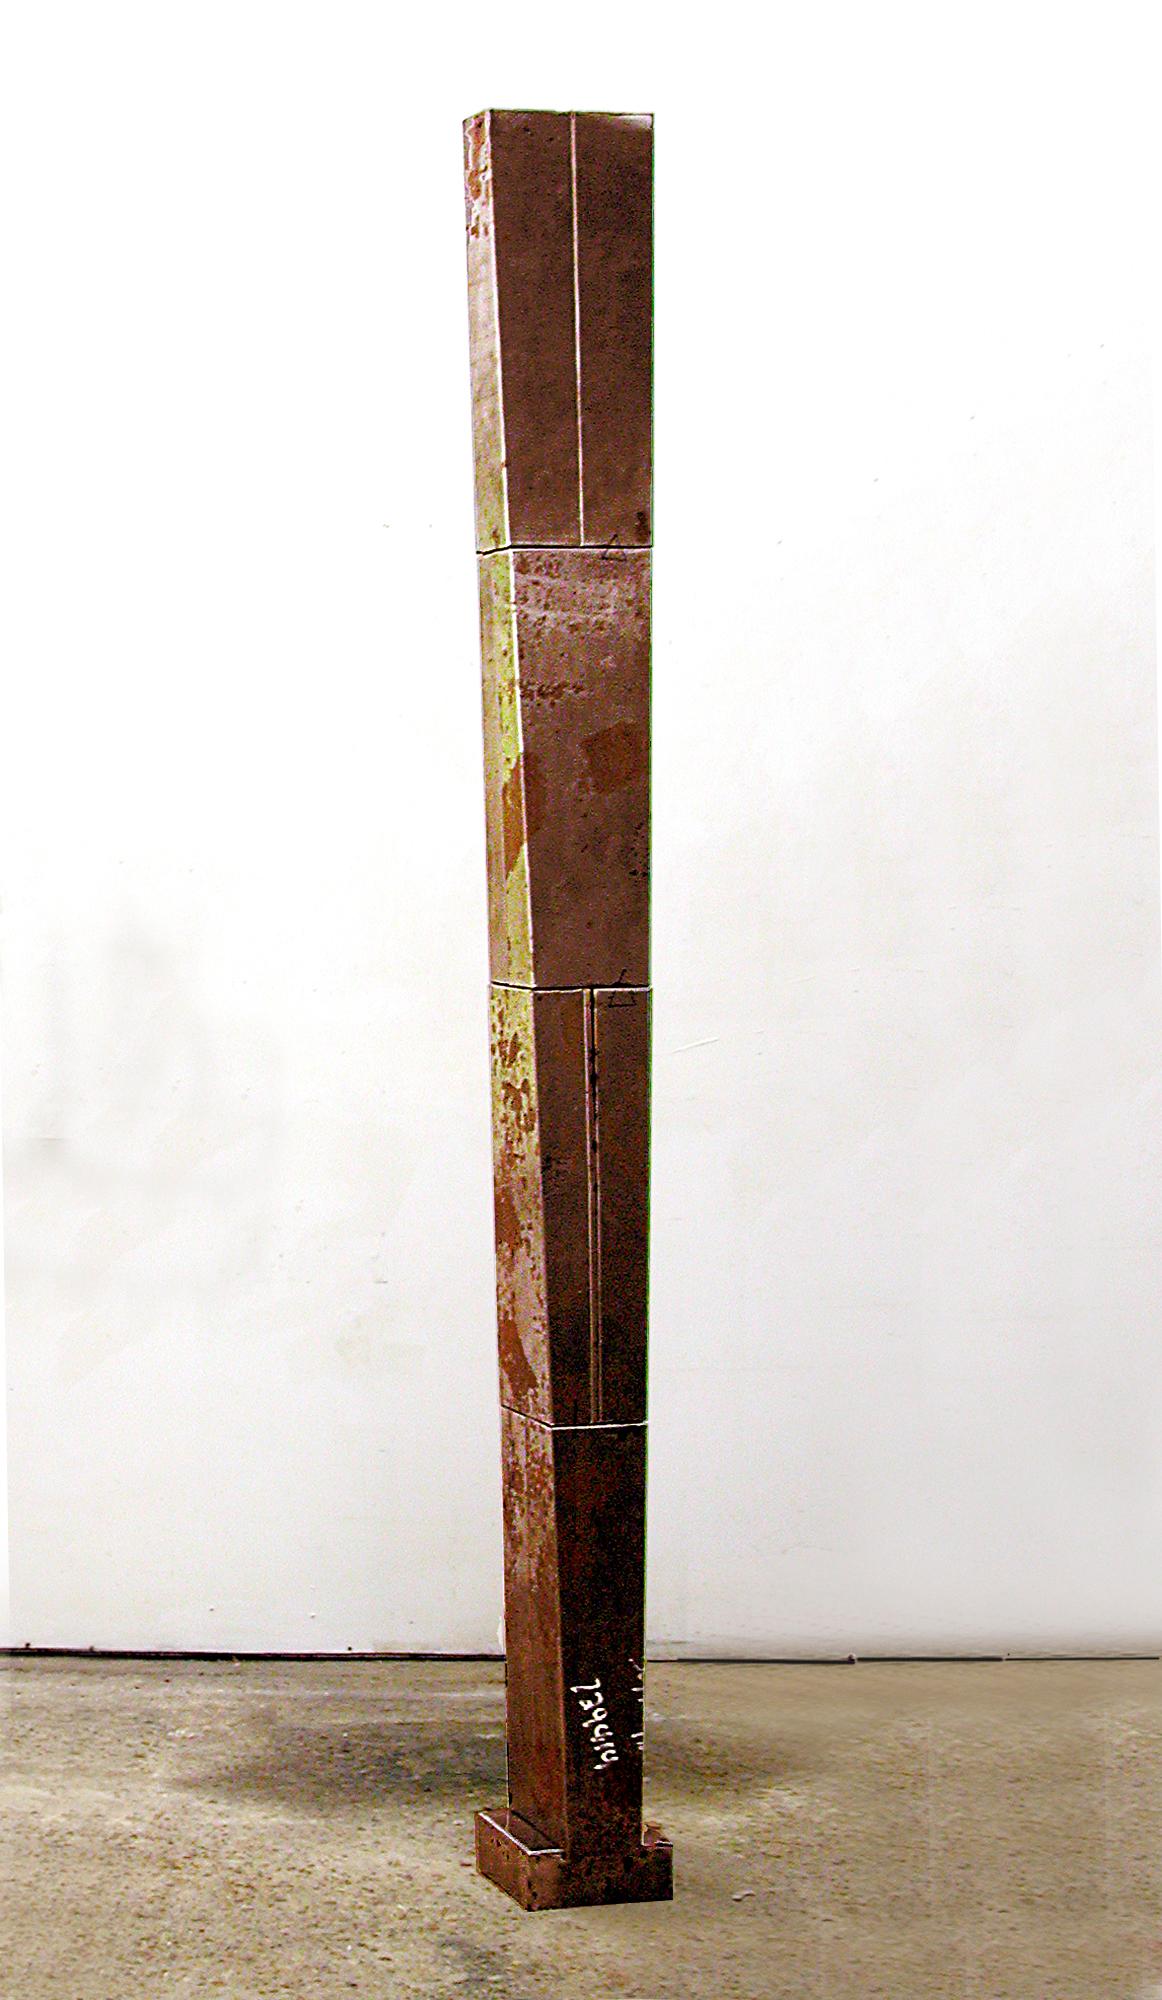 Abstract Sculpture Peter Charles - Monument